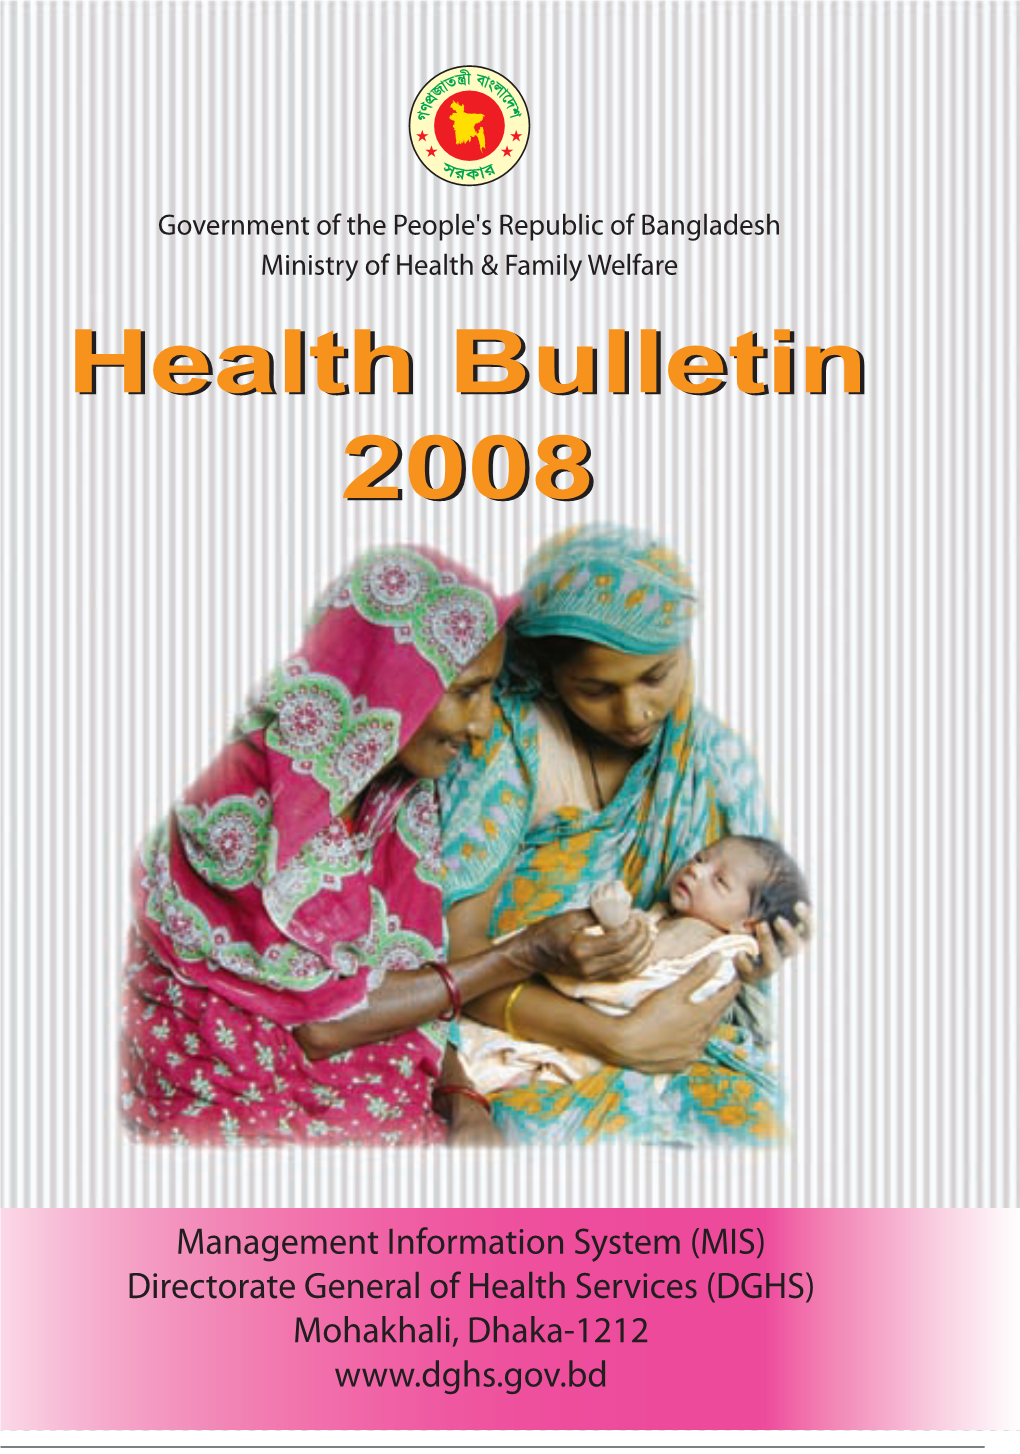 Health Bulletin 2008 Excerpted Lot of Information from the Previous Health Bulletin Published in 2007